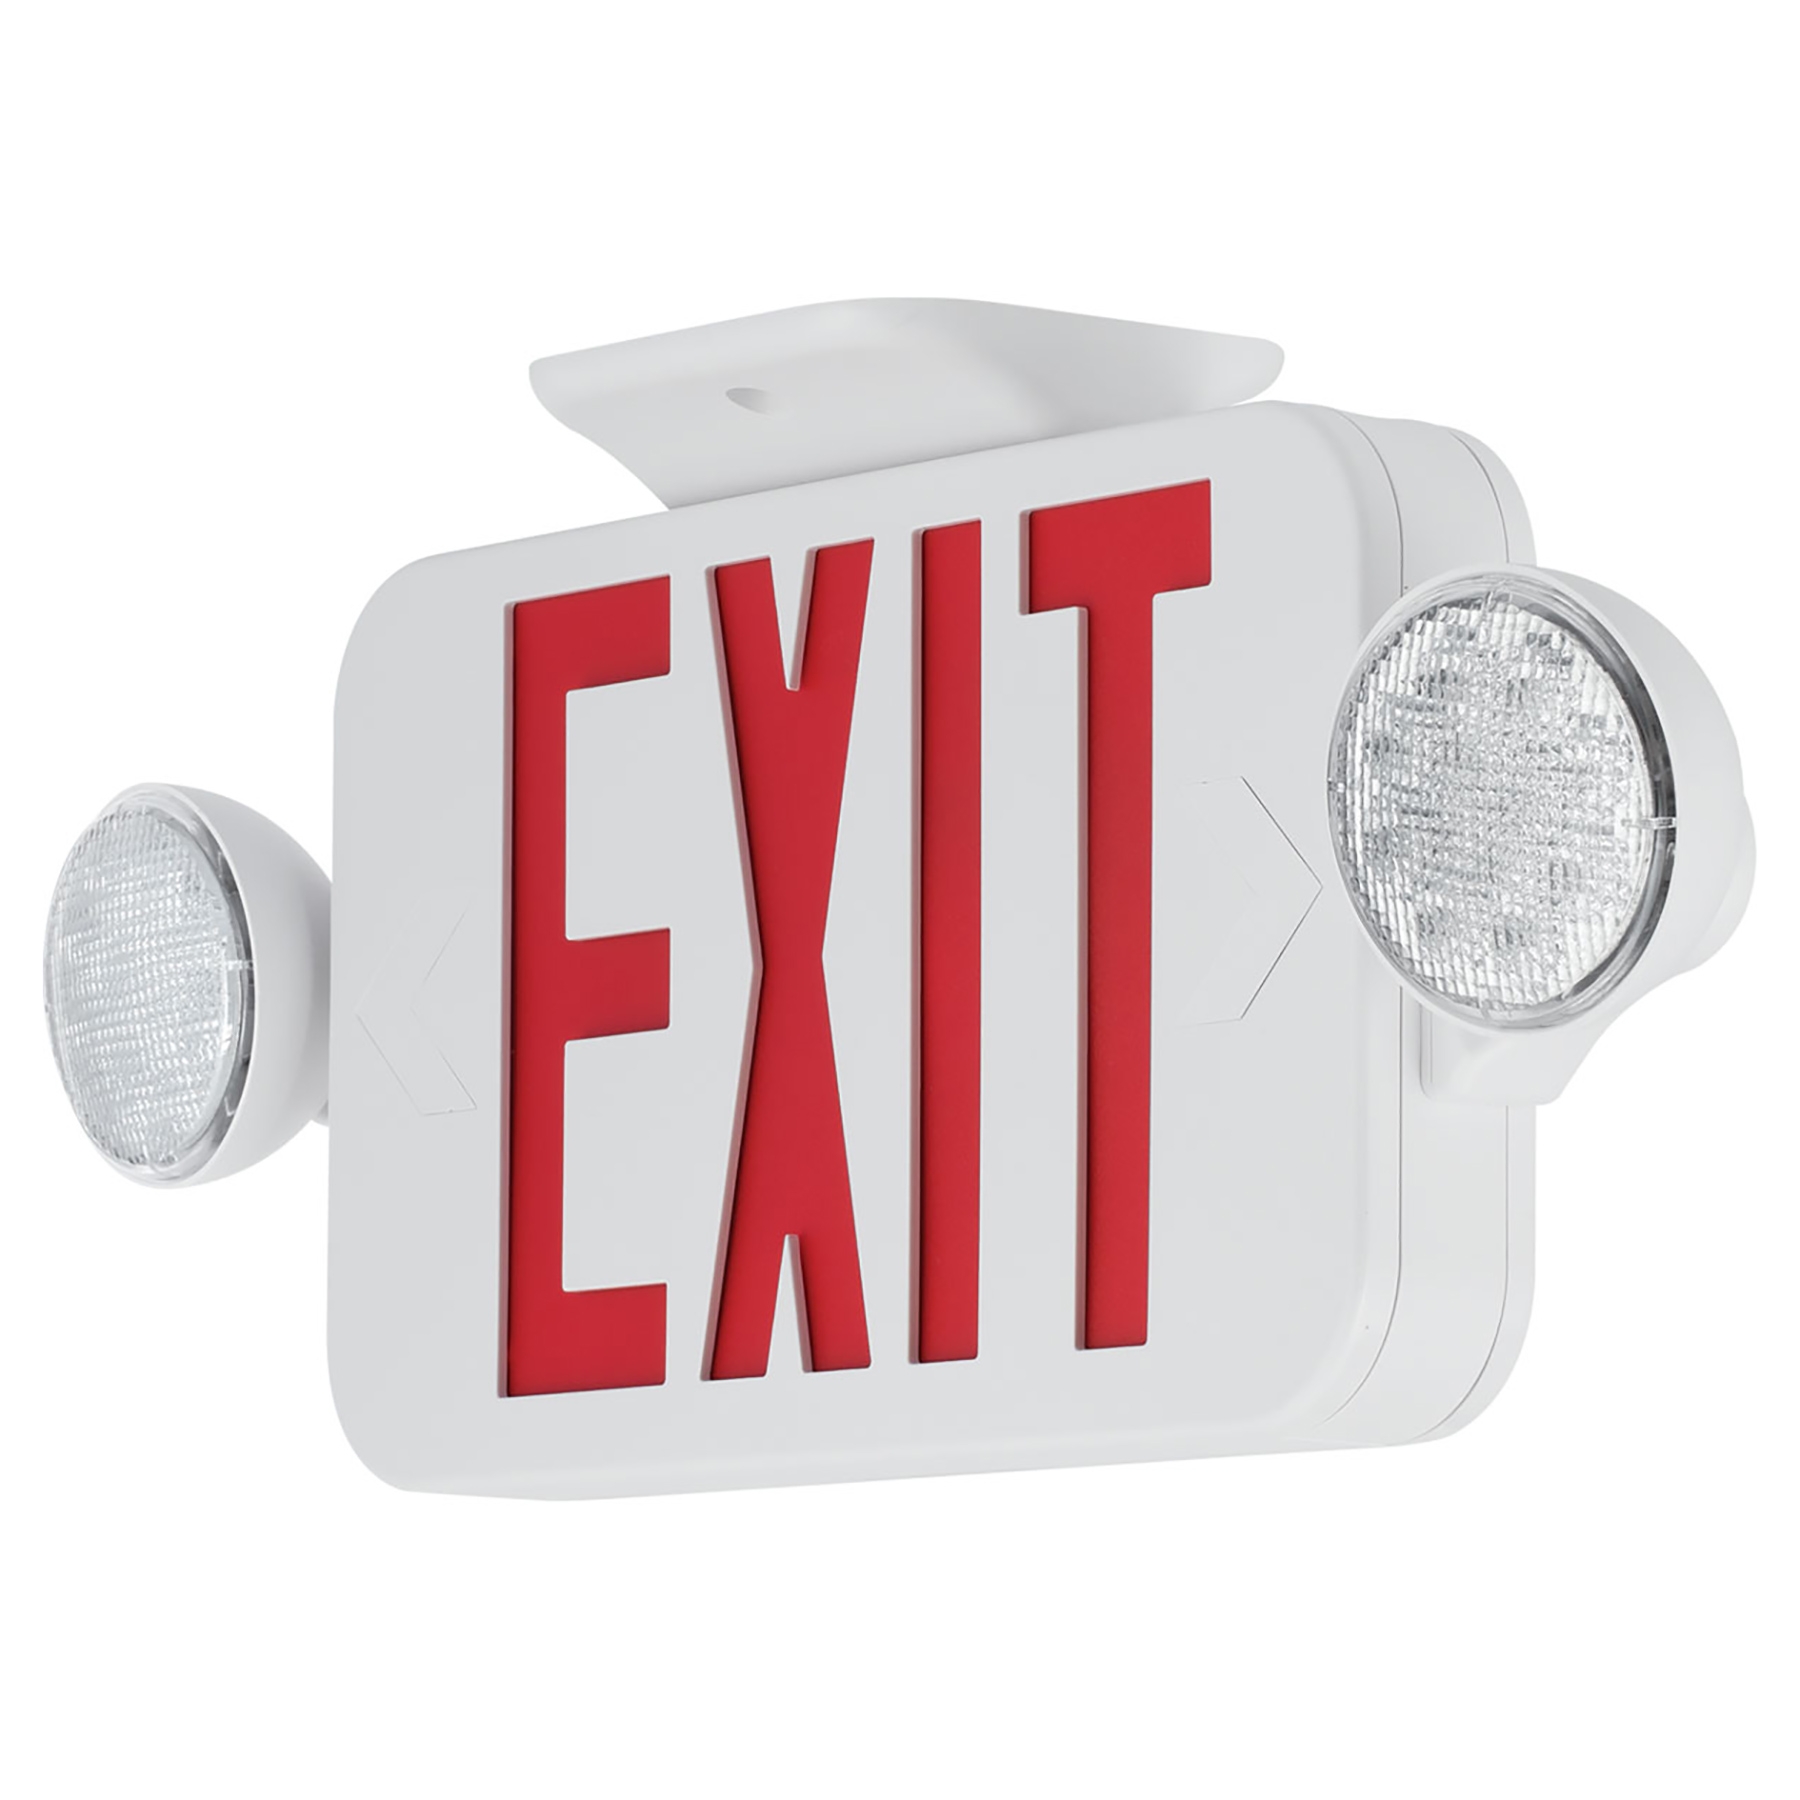 PECUE-UR-30-Progress Commercial Lighting-18 Inch 3.18W LED Universal Exit/Emergency Sign Light - image 2 of 2